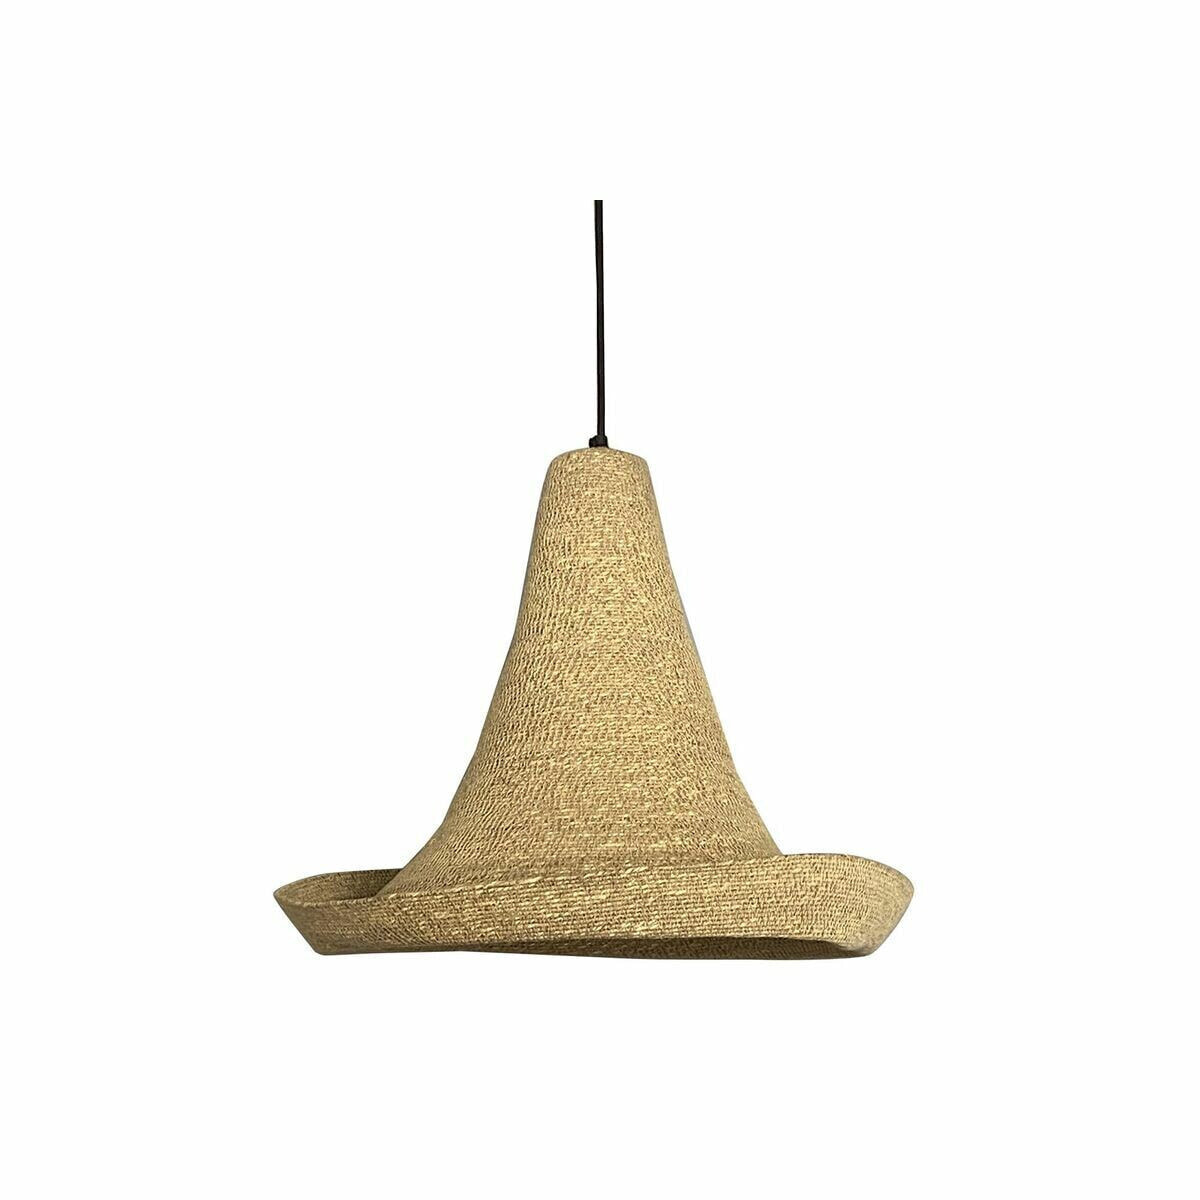 Ceiling Light DKD Home Decor Brown Seagrass (51 x 51 x 43 cm)